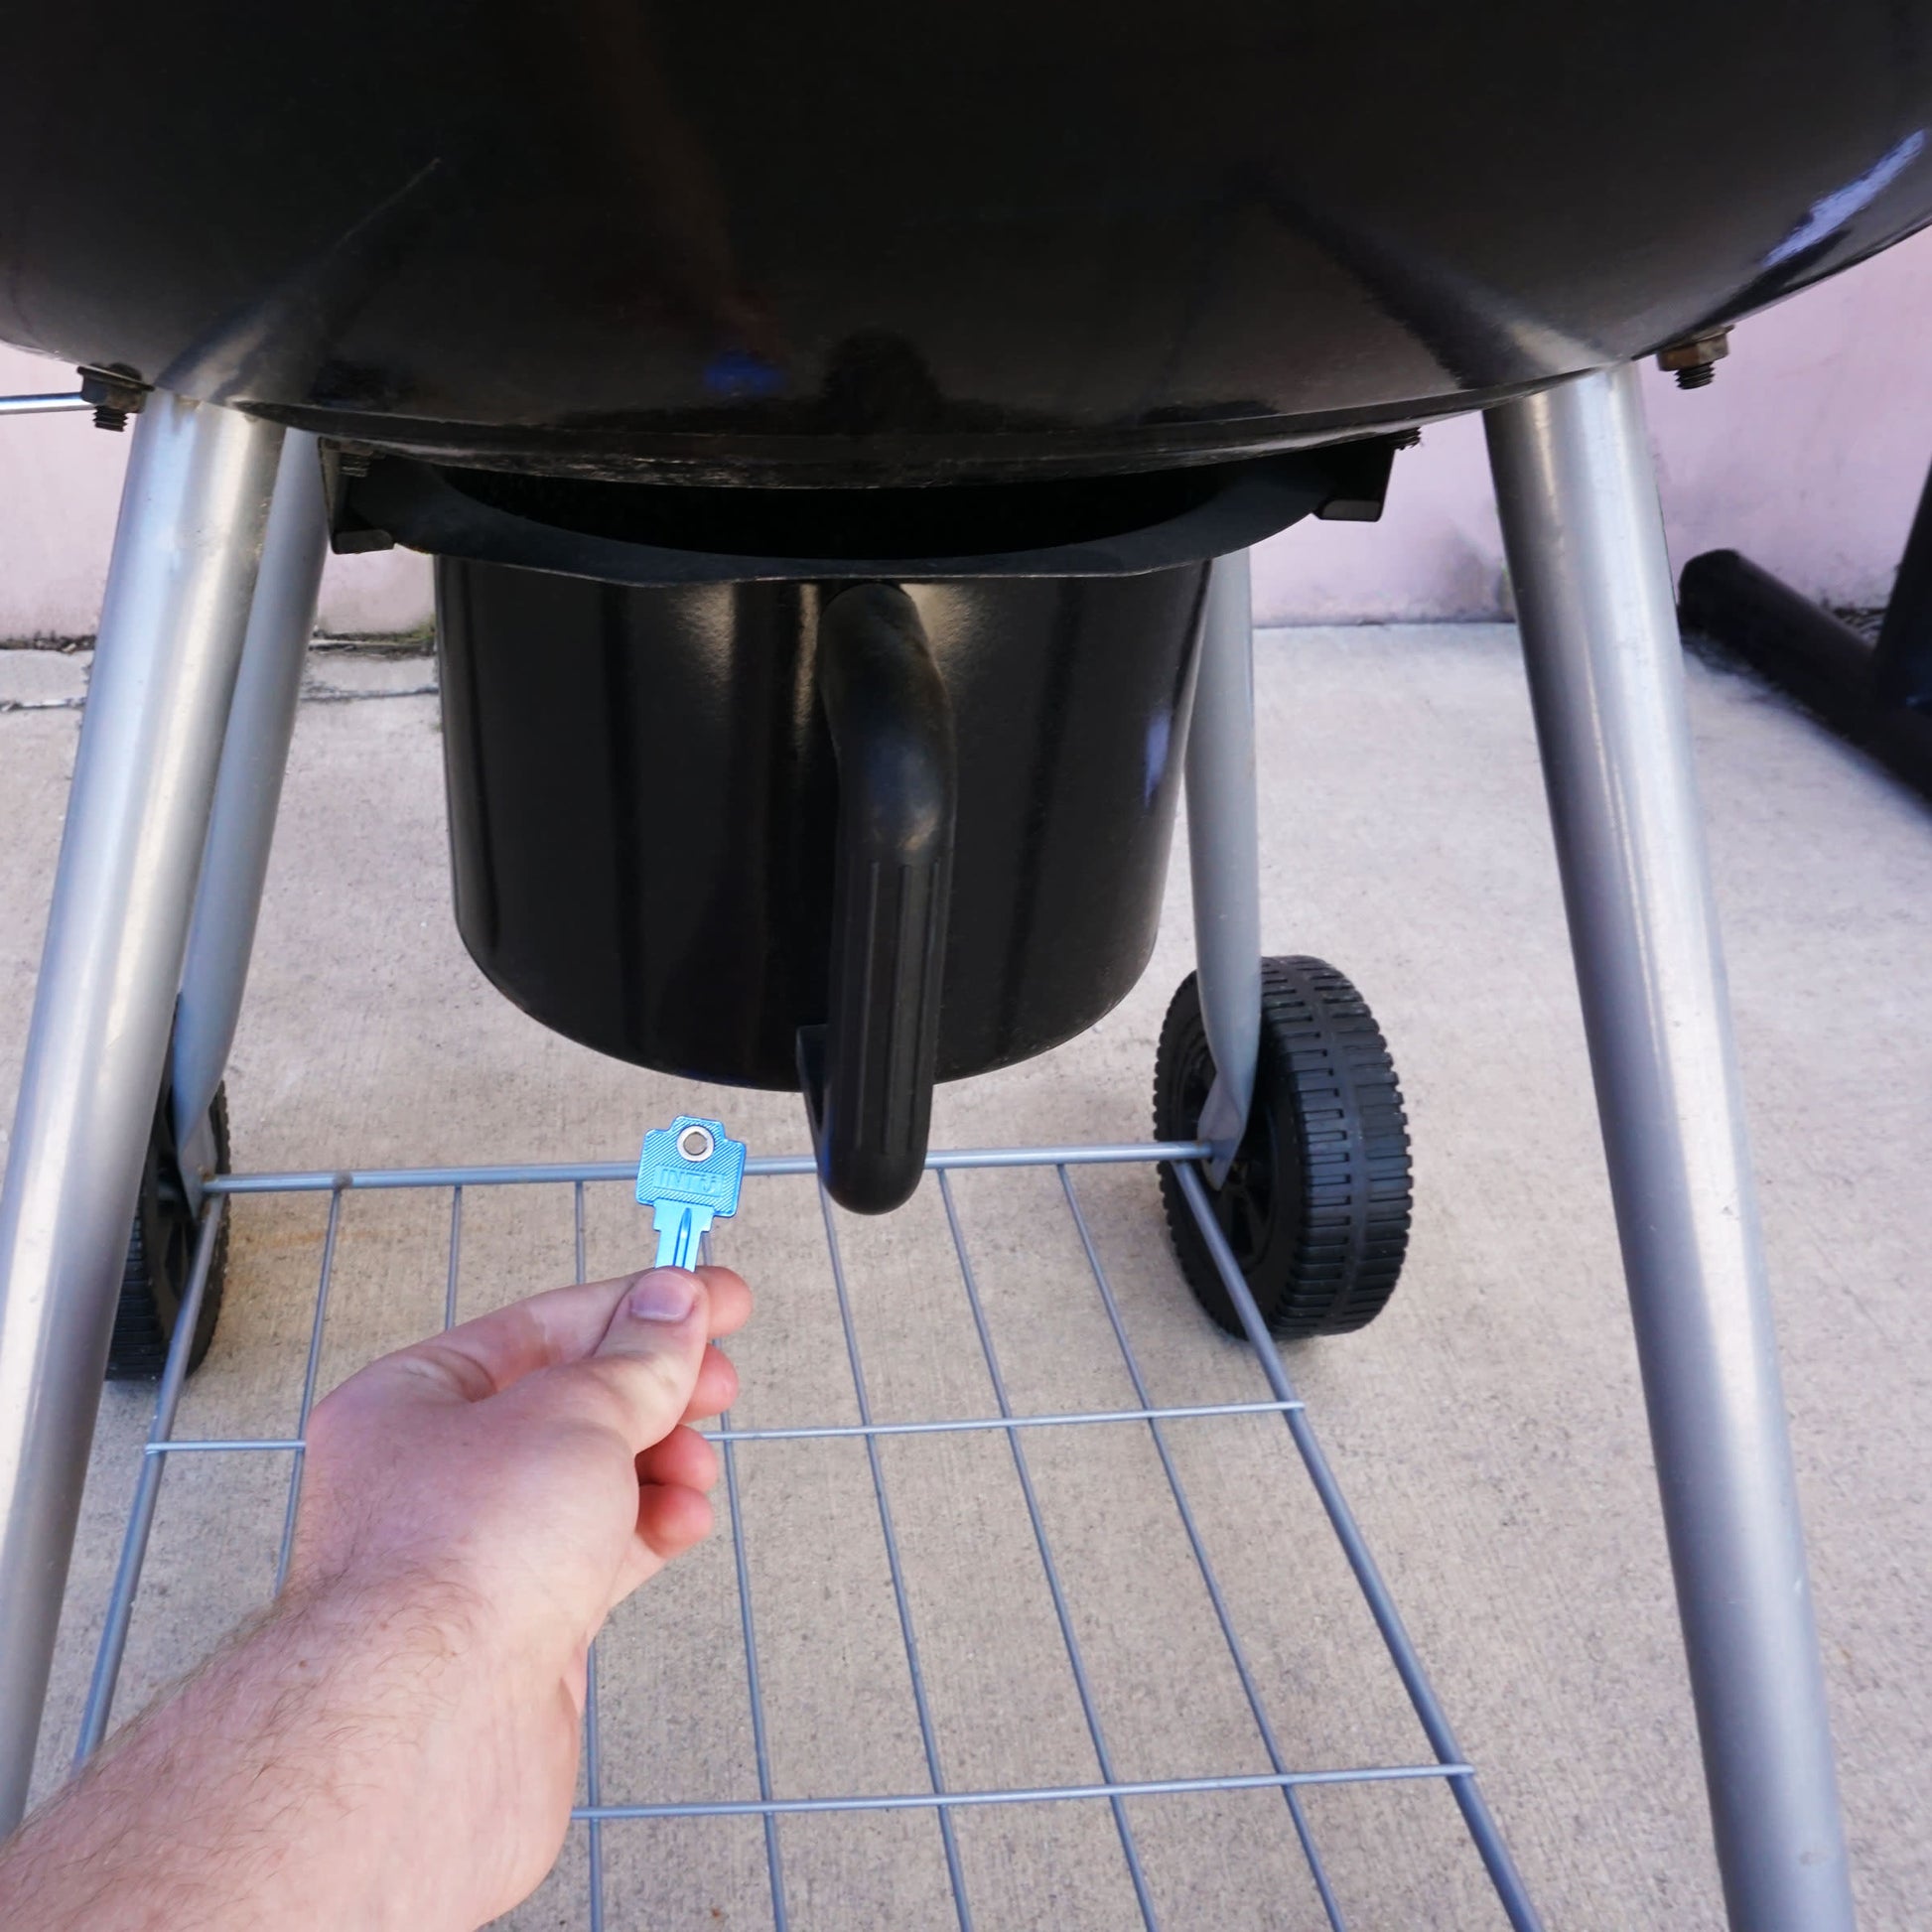 Load image into Gallery viewer, 50773 Magnetic Key, WR5-67 Blue - Hand Holding Blue Magnetic Key Beneath a Barbeque Grill